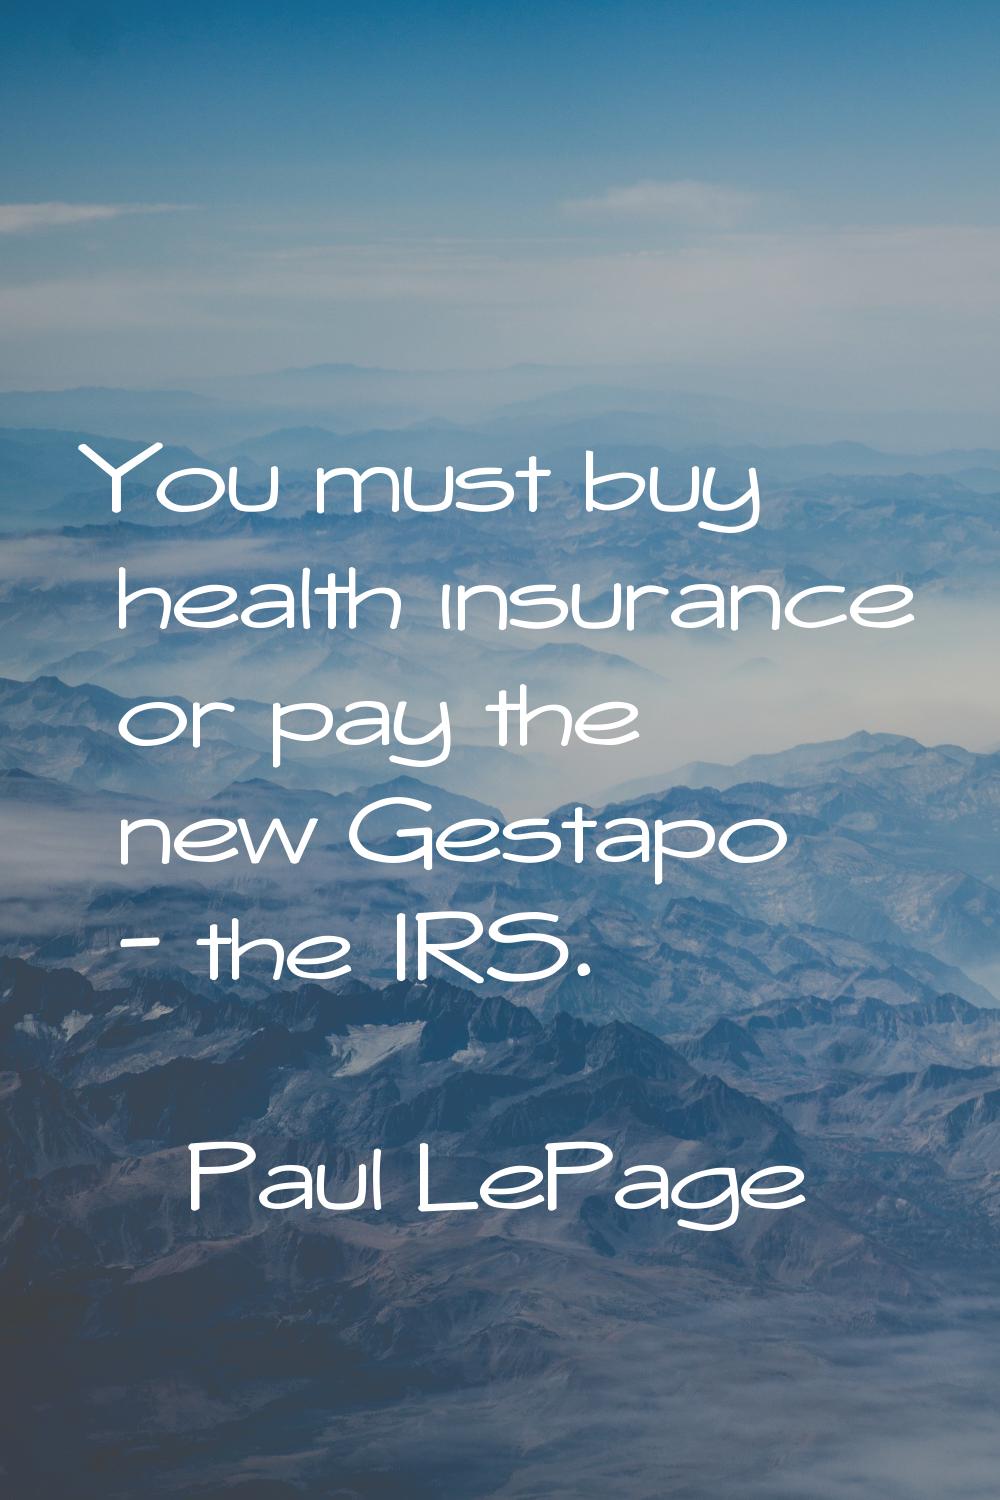 You must buy health insurance or pay the new Gestapo - the IRS.